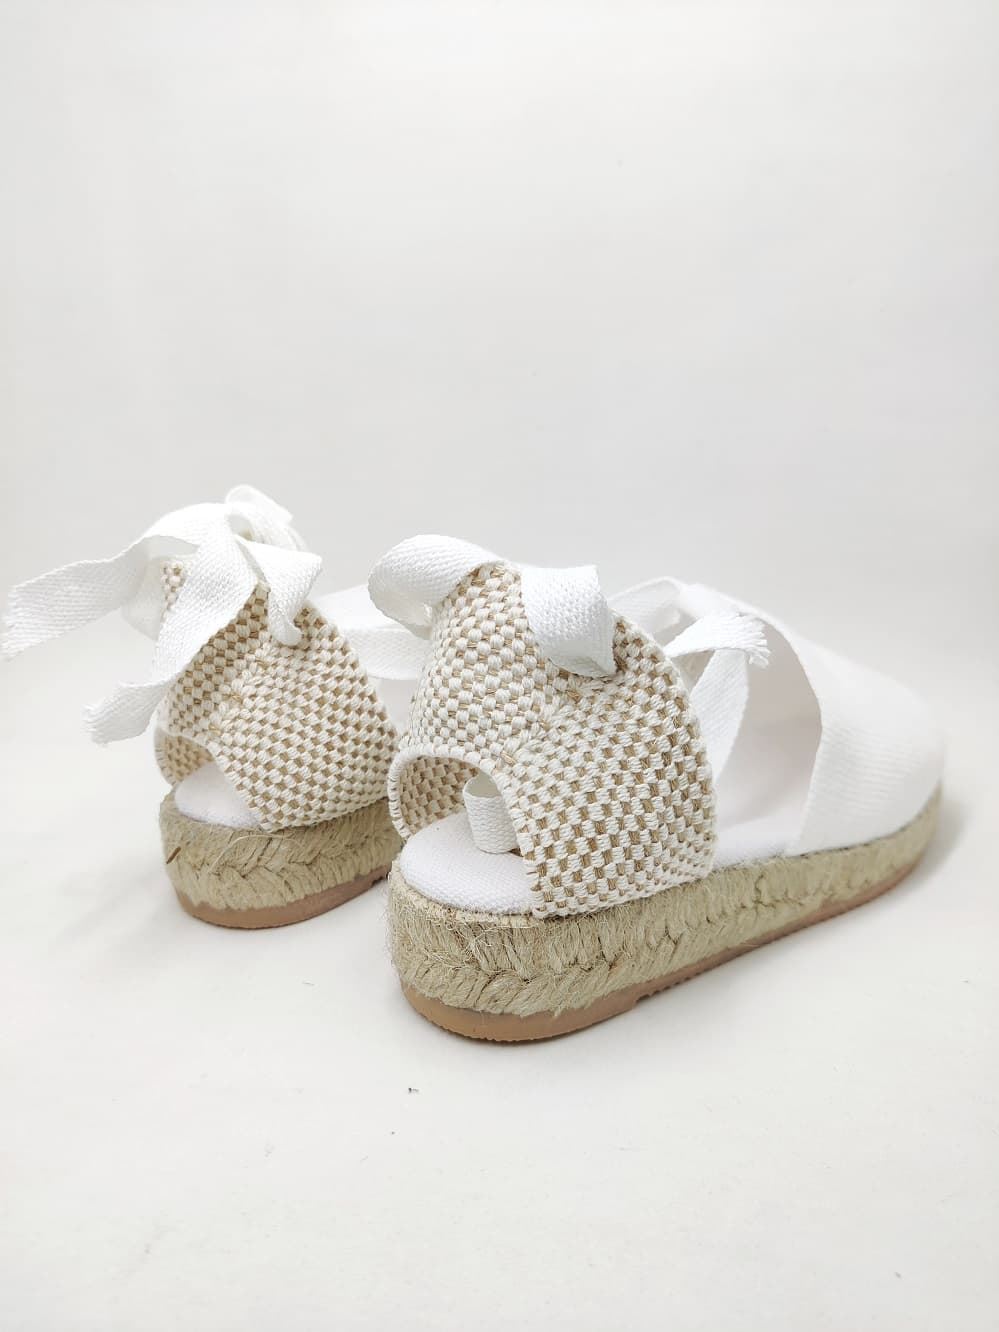 White wedge espadrilles with ribbons for girls and women - Image 3